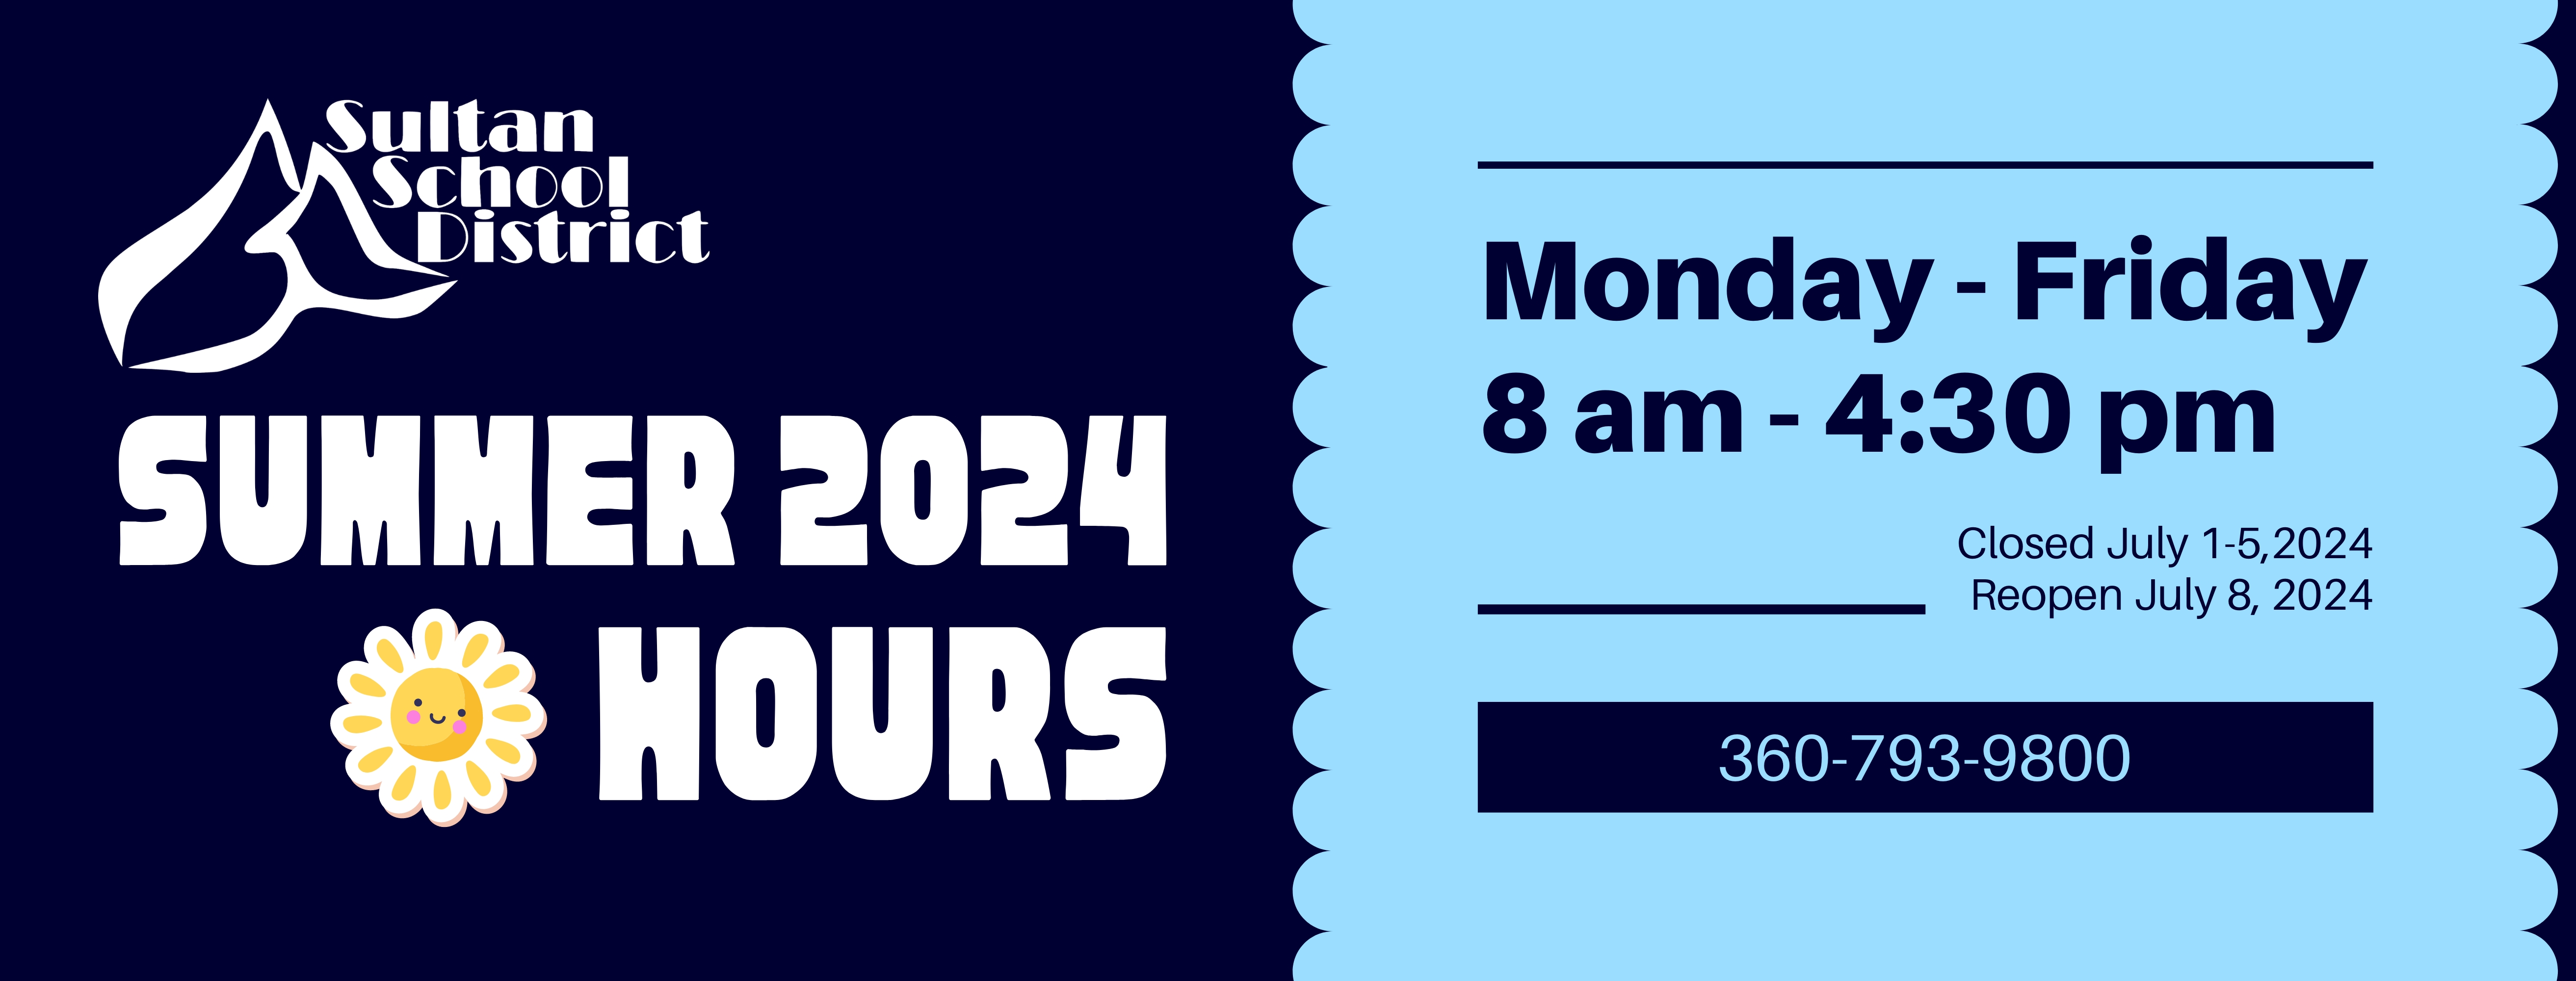 Sultan School District - Summer 2024 Hours: Monday - Friday 8 am - 4:30 pm Closed July 1-5,2024 Reopen July 8, 2024 360-793-9800